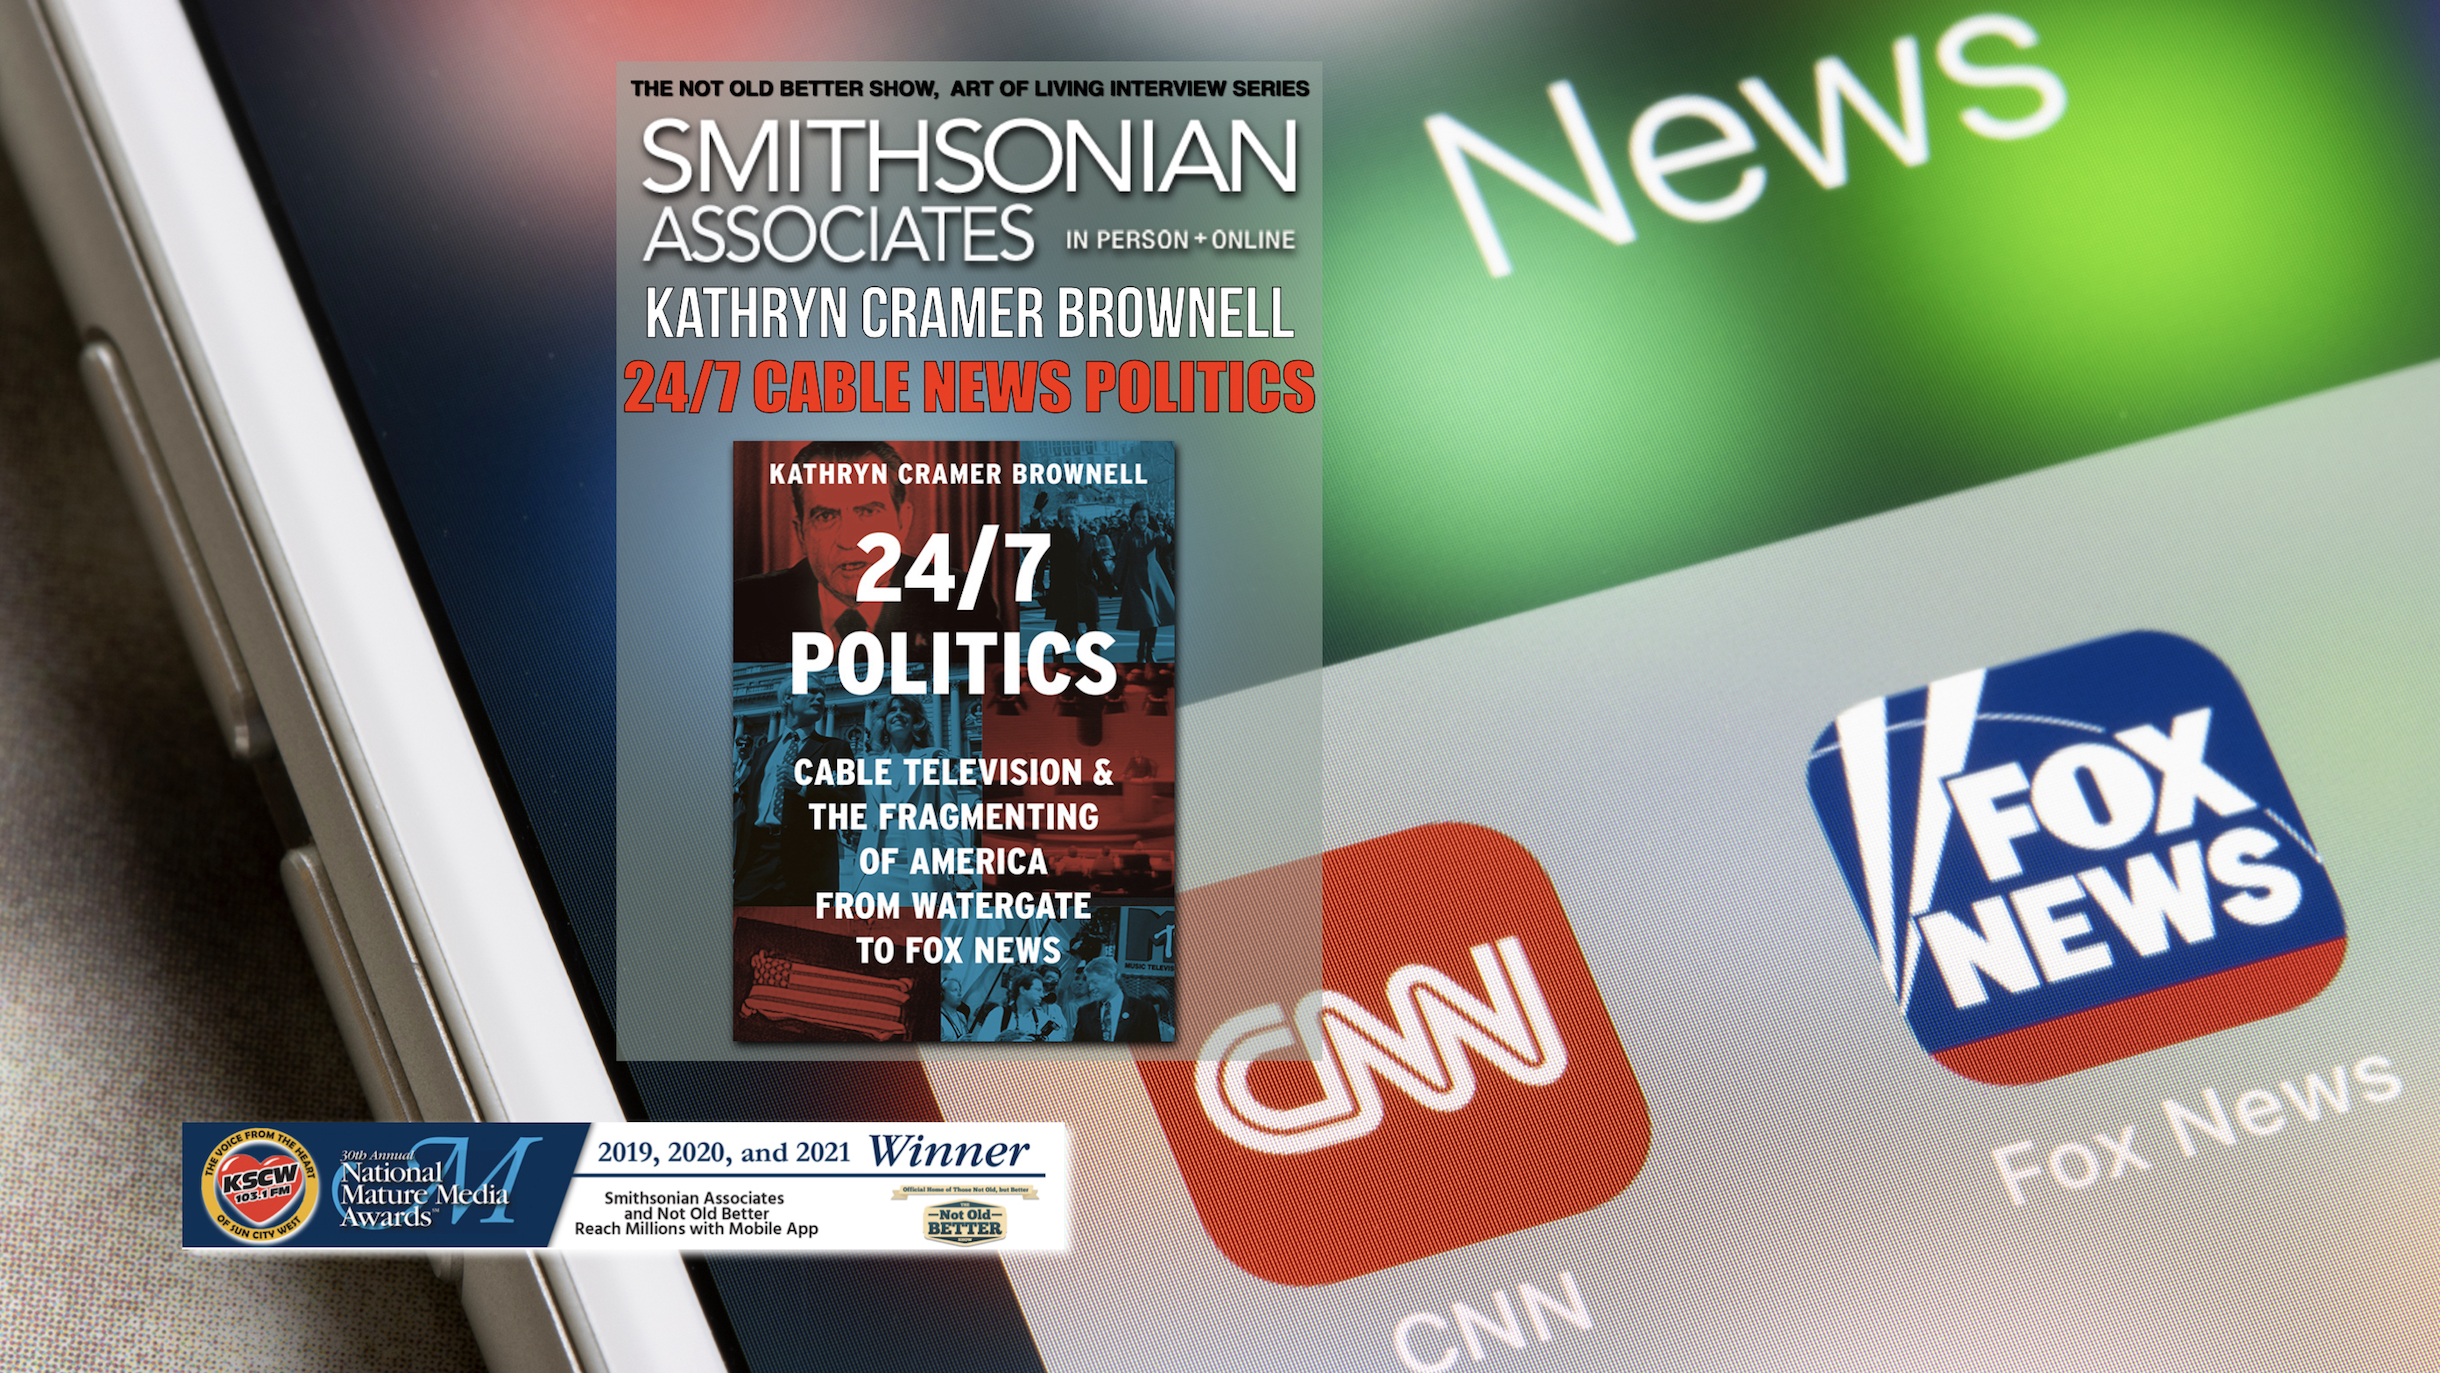 Decoding the Cable Revolution: How 24/7 Politics Shaped a Generation and Our Democracy with Kathryn Cramer Brownell